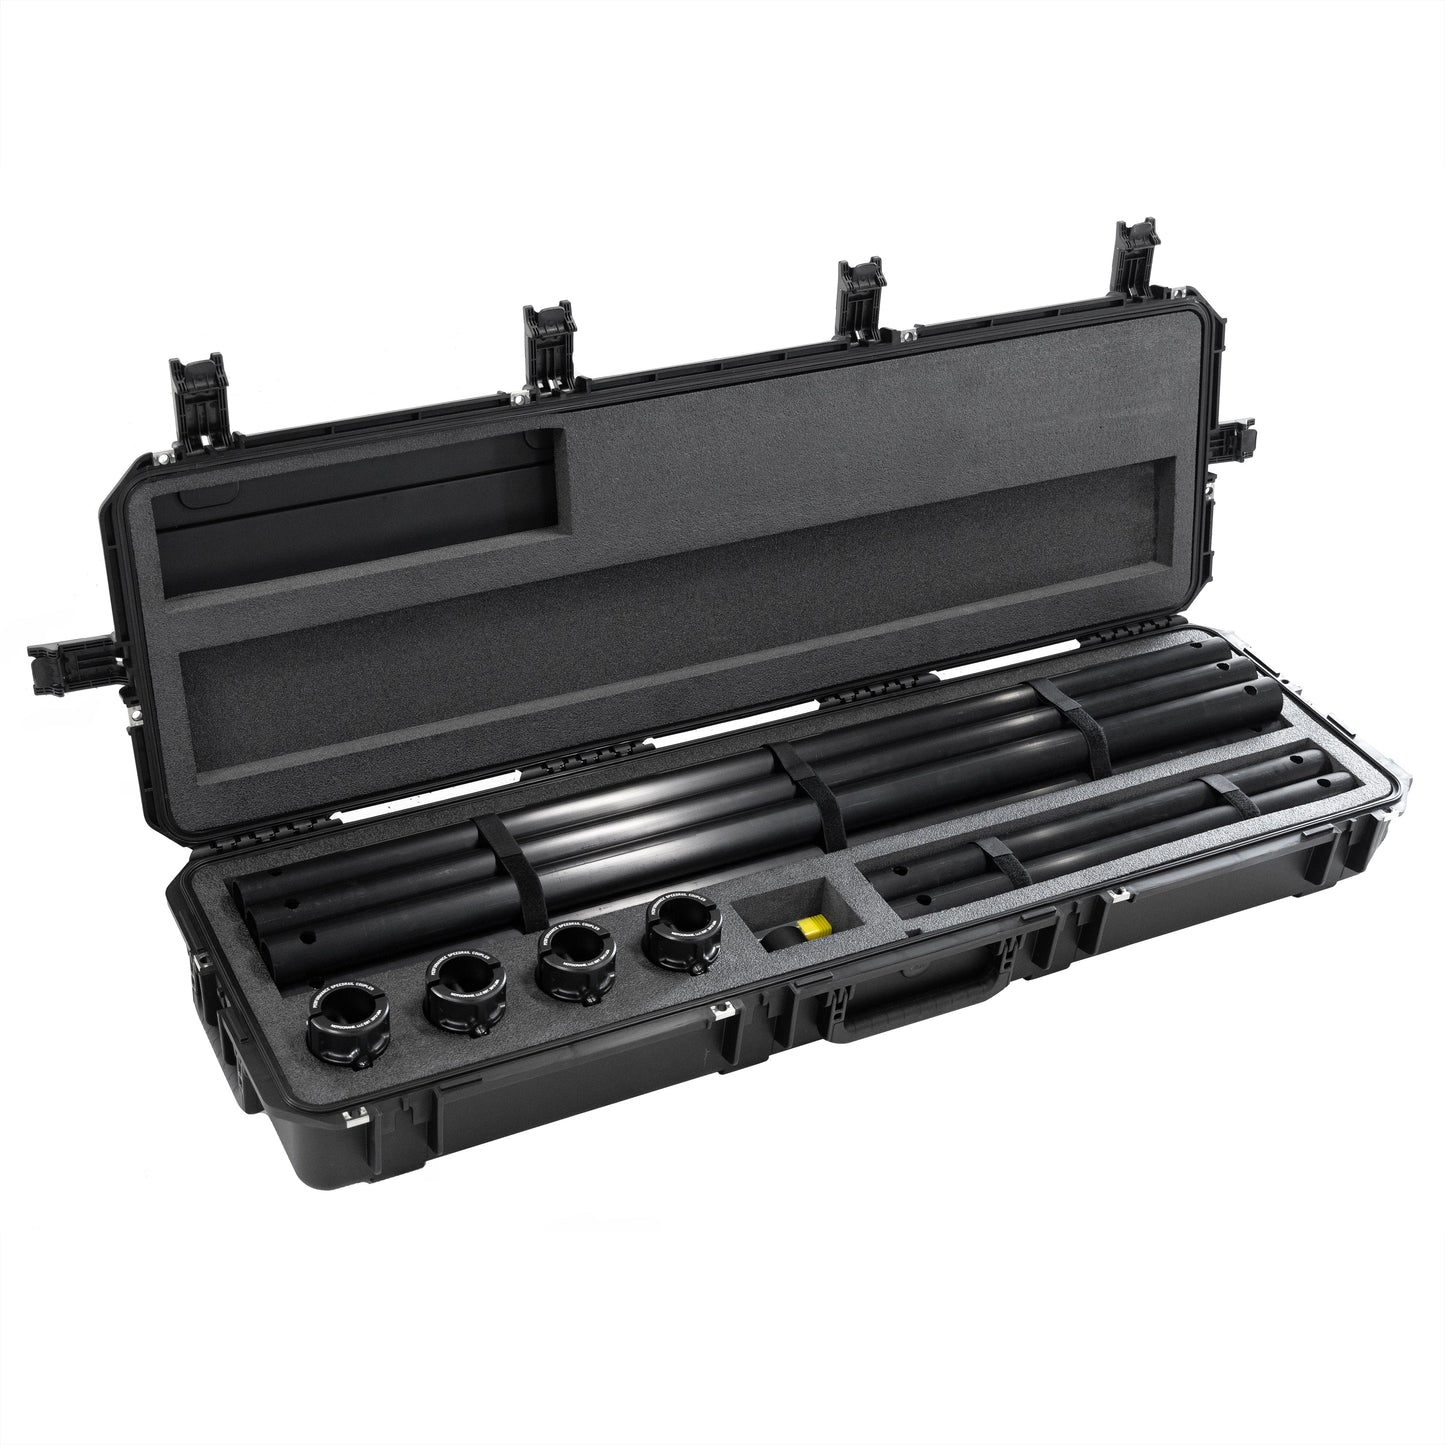 PSC Complete Kit - Portable Speedrail System